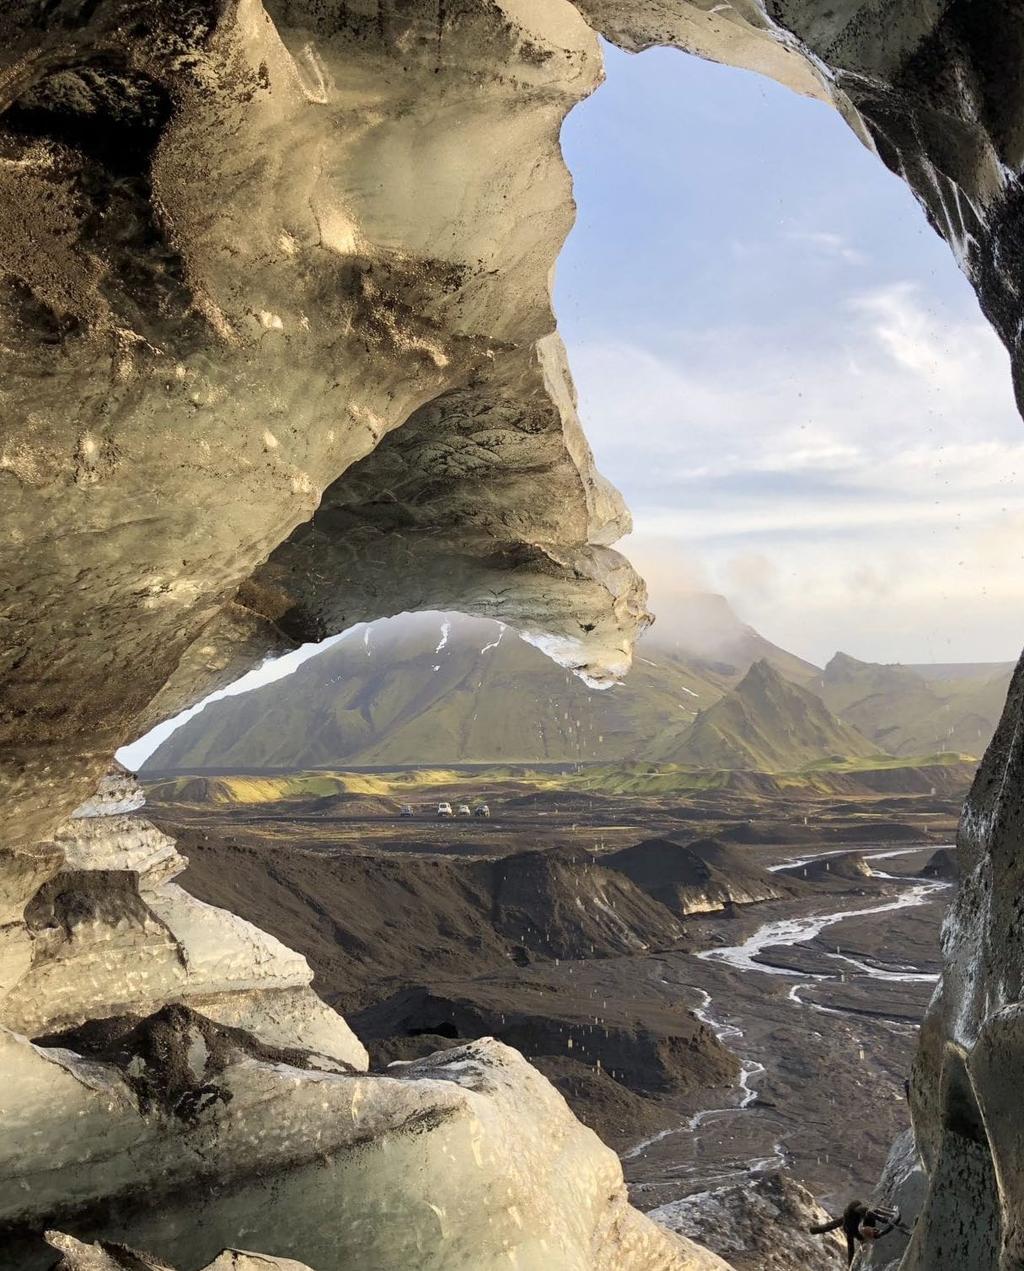 GLACIER ADVENTURES ICE CAVE BY KATLA VOLCANO Jump into a Super Jeep from Vik to discover the Moss covered Mountains POPULAR TOURS SNORKEL BETWEEN CONTINENTS IN SILFRA Once-in-a-lifetime